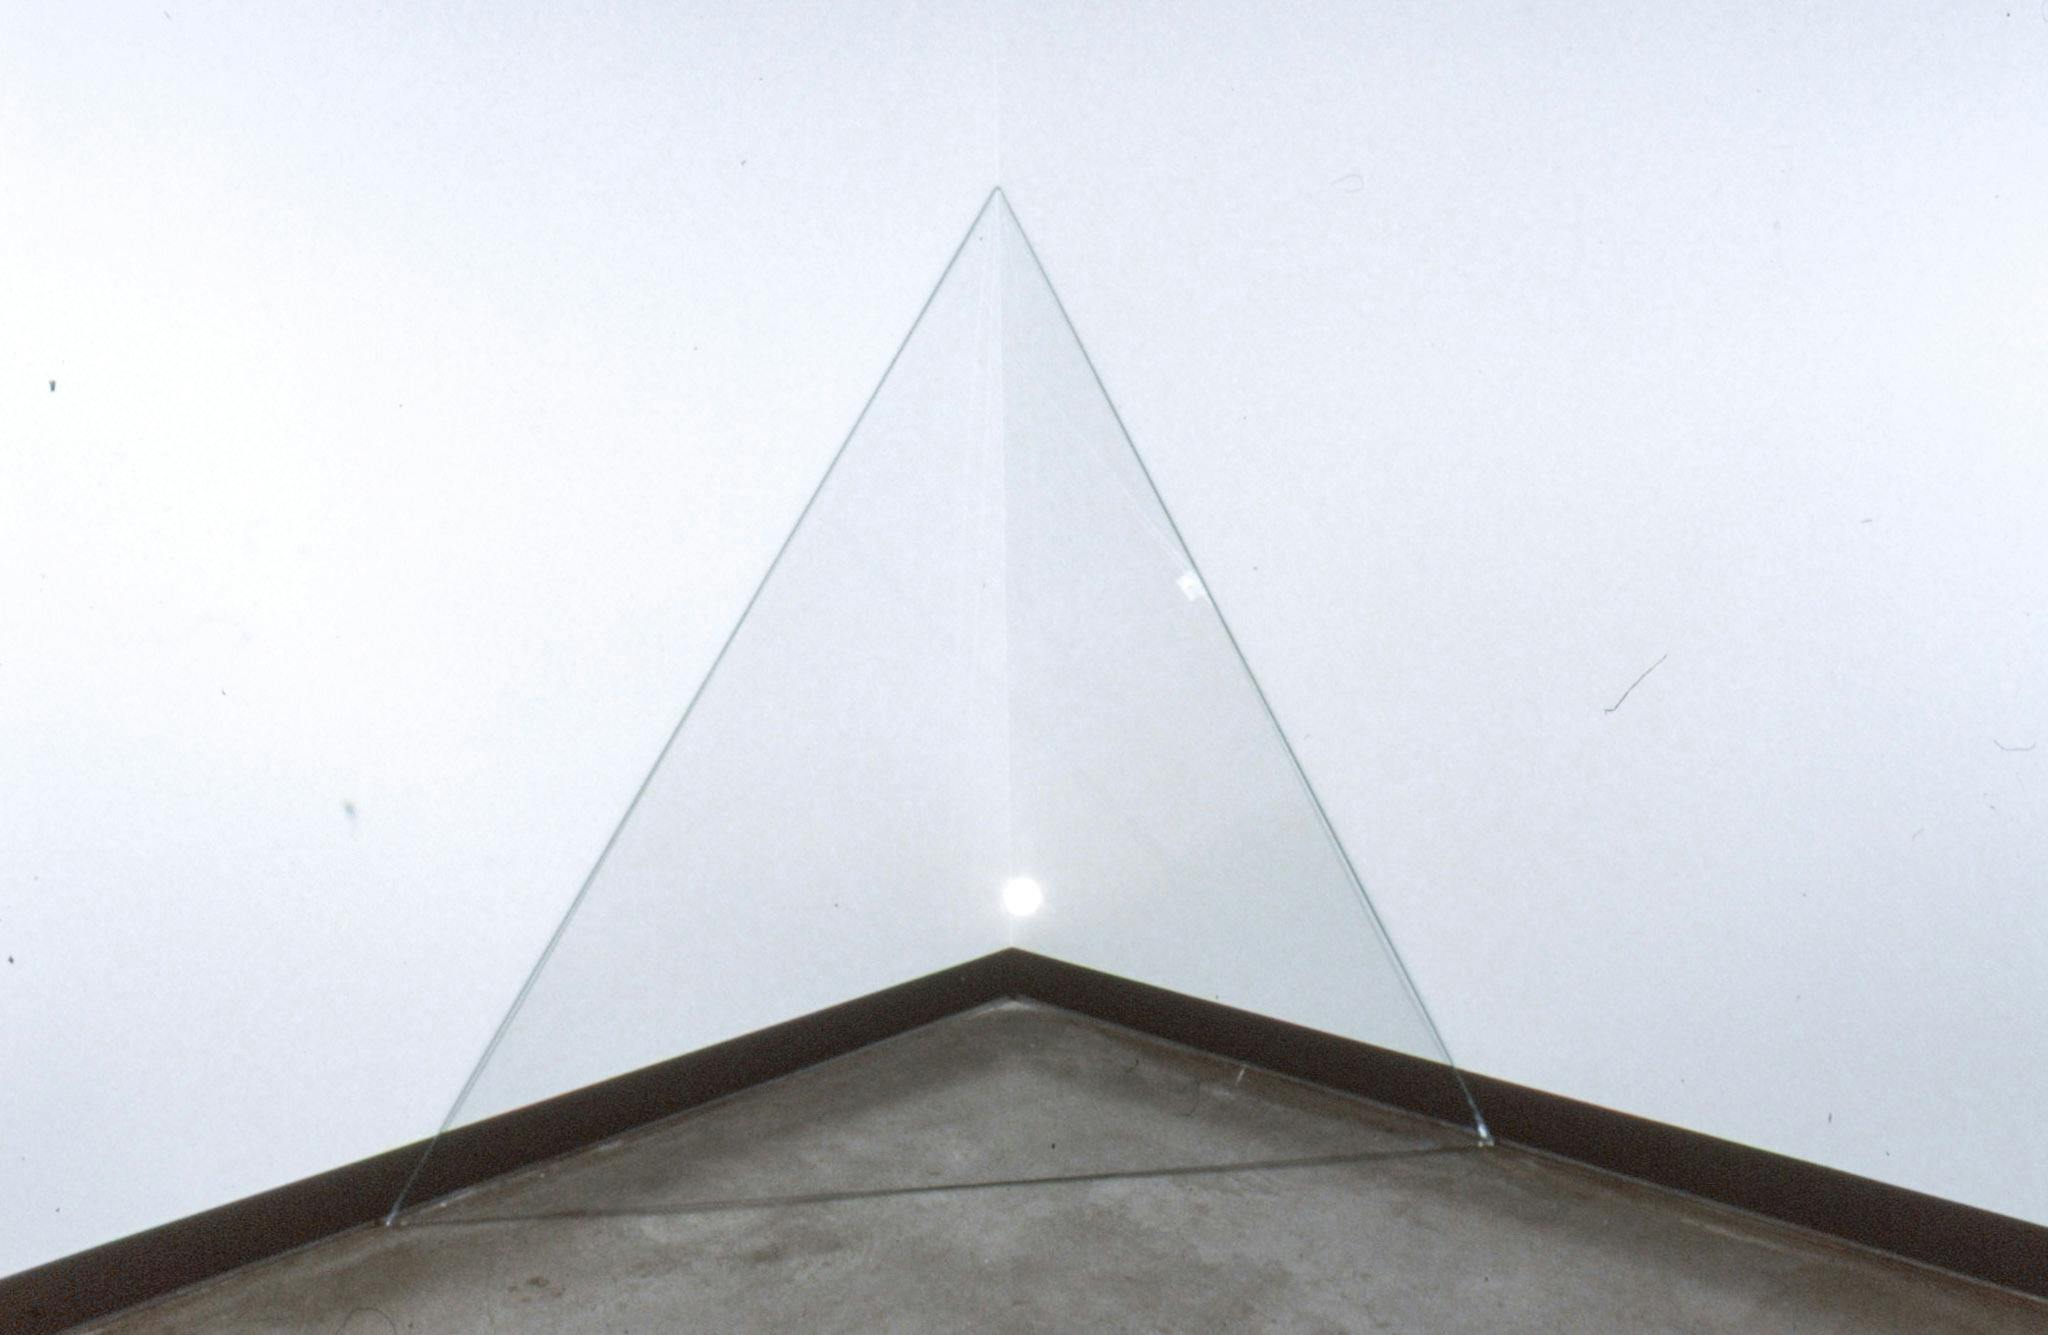 Installation image of Nestor Krüger’s artwork. A transparent board, which is cut out in a triangular shape, leans against a corner of a gallery space. The work is approximately the size of a 3-year-old child.